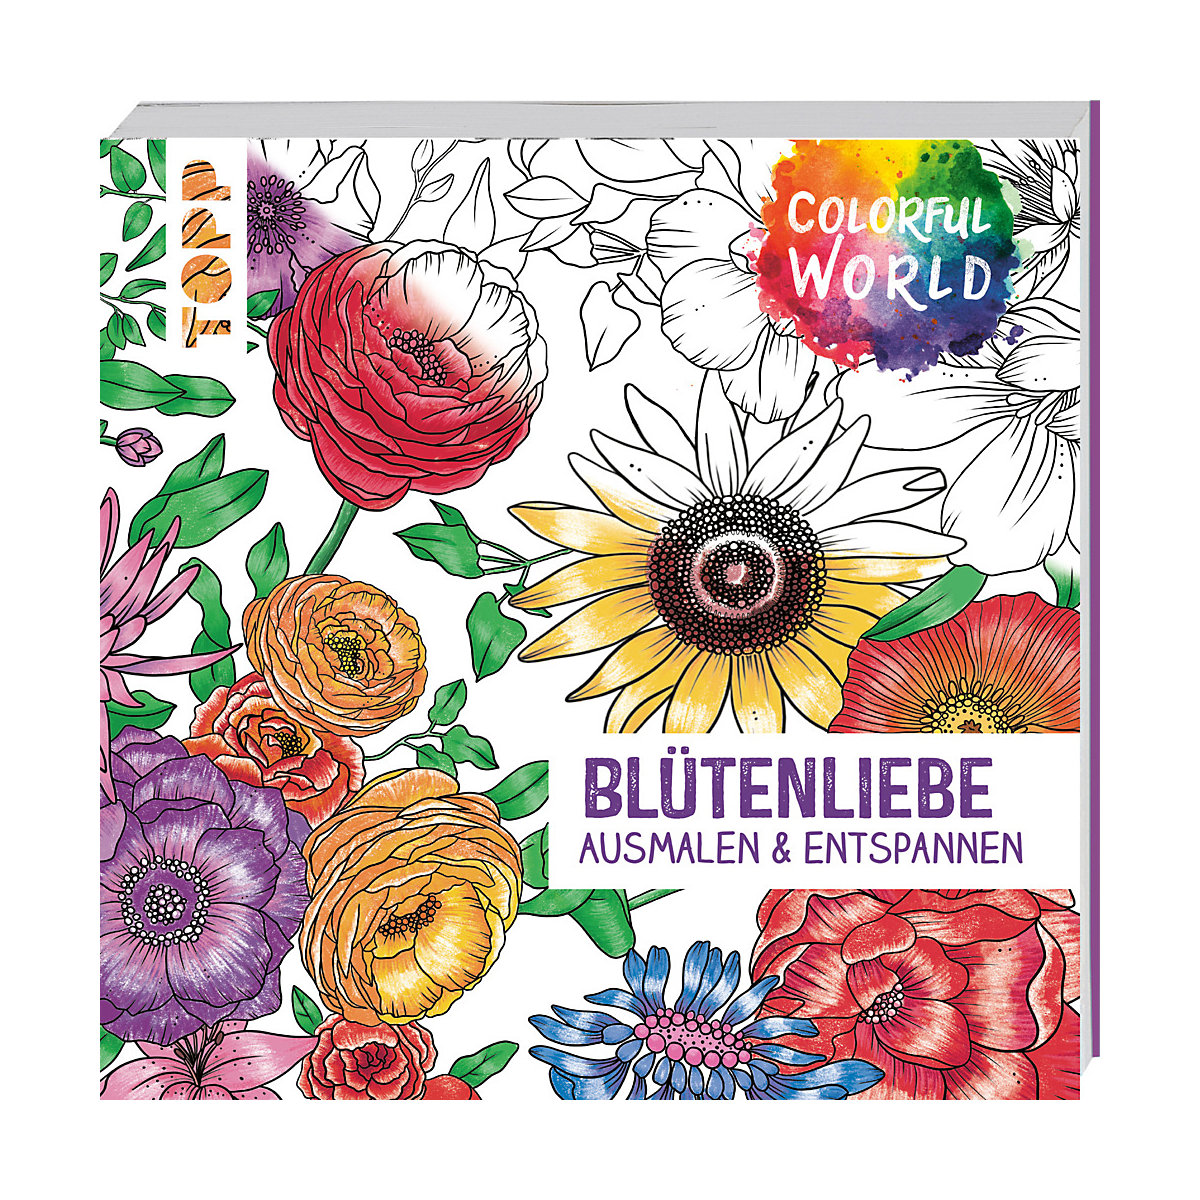 Colorful World Blütenliebe